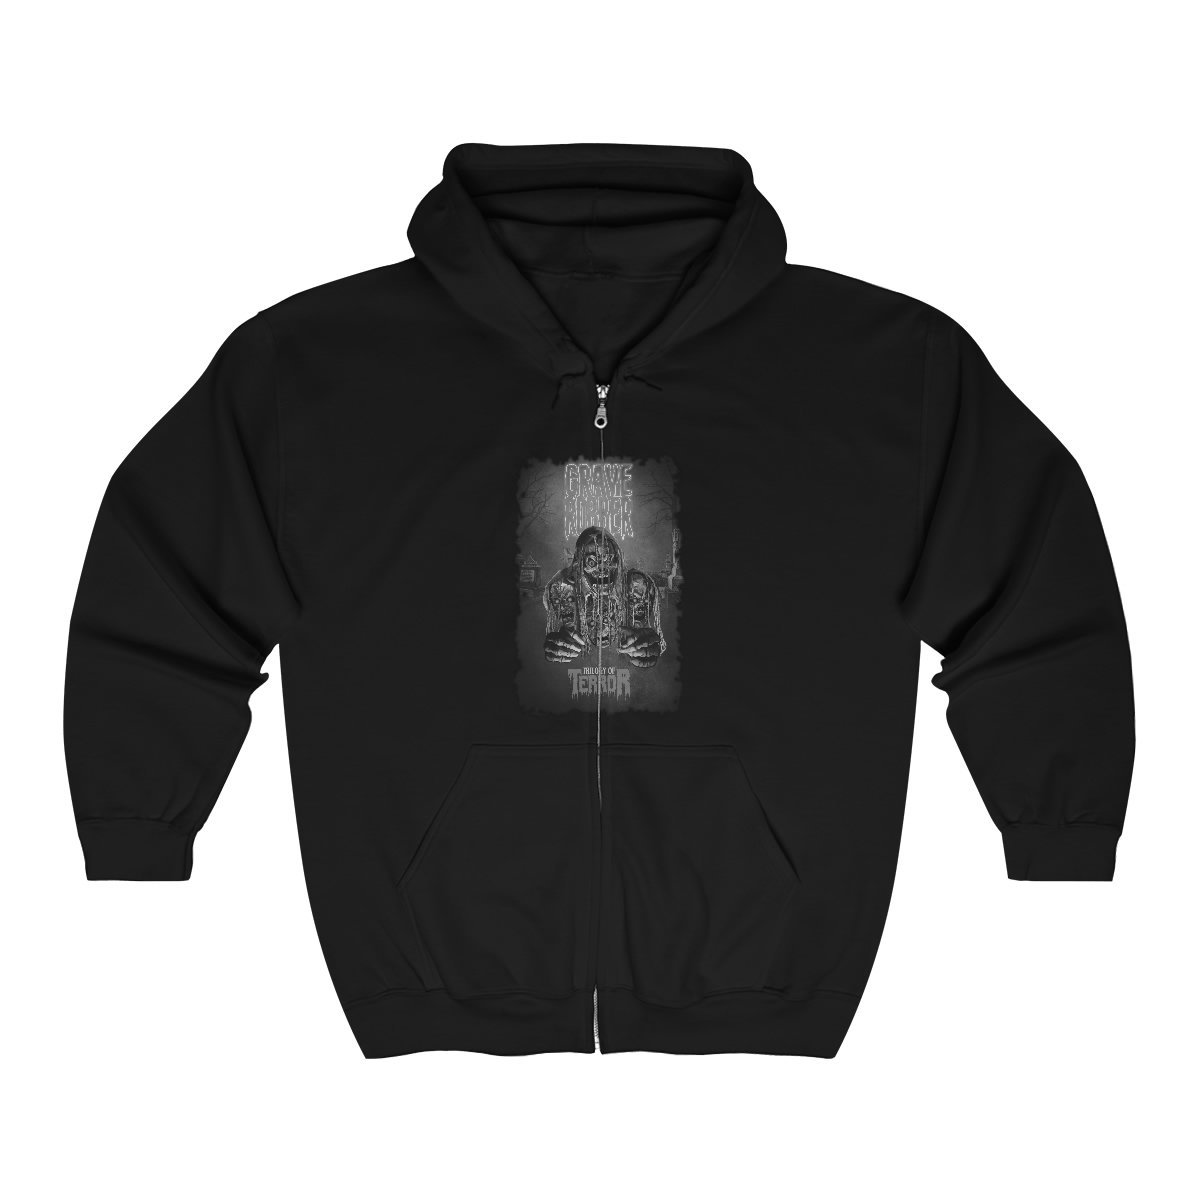 Grave Robber Trilogy of Terror (Limited Edition Black and White) Full Zip Hooded Sweatshirt